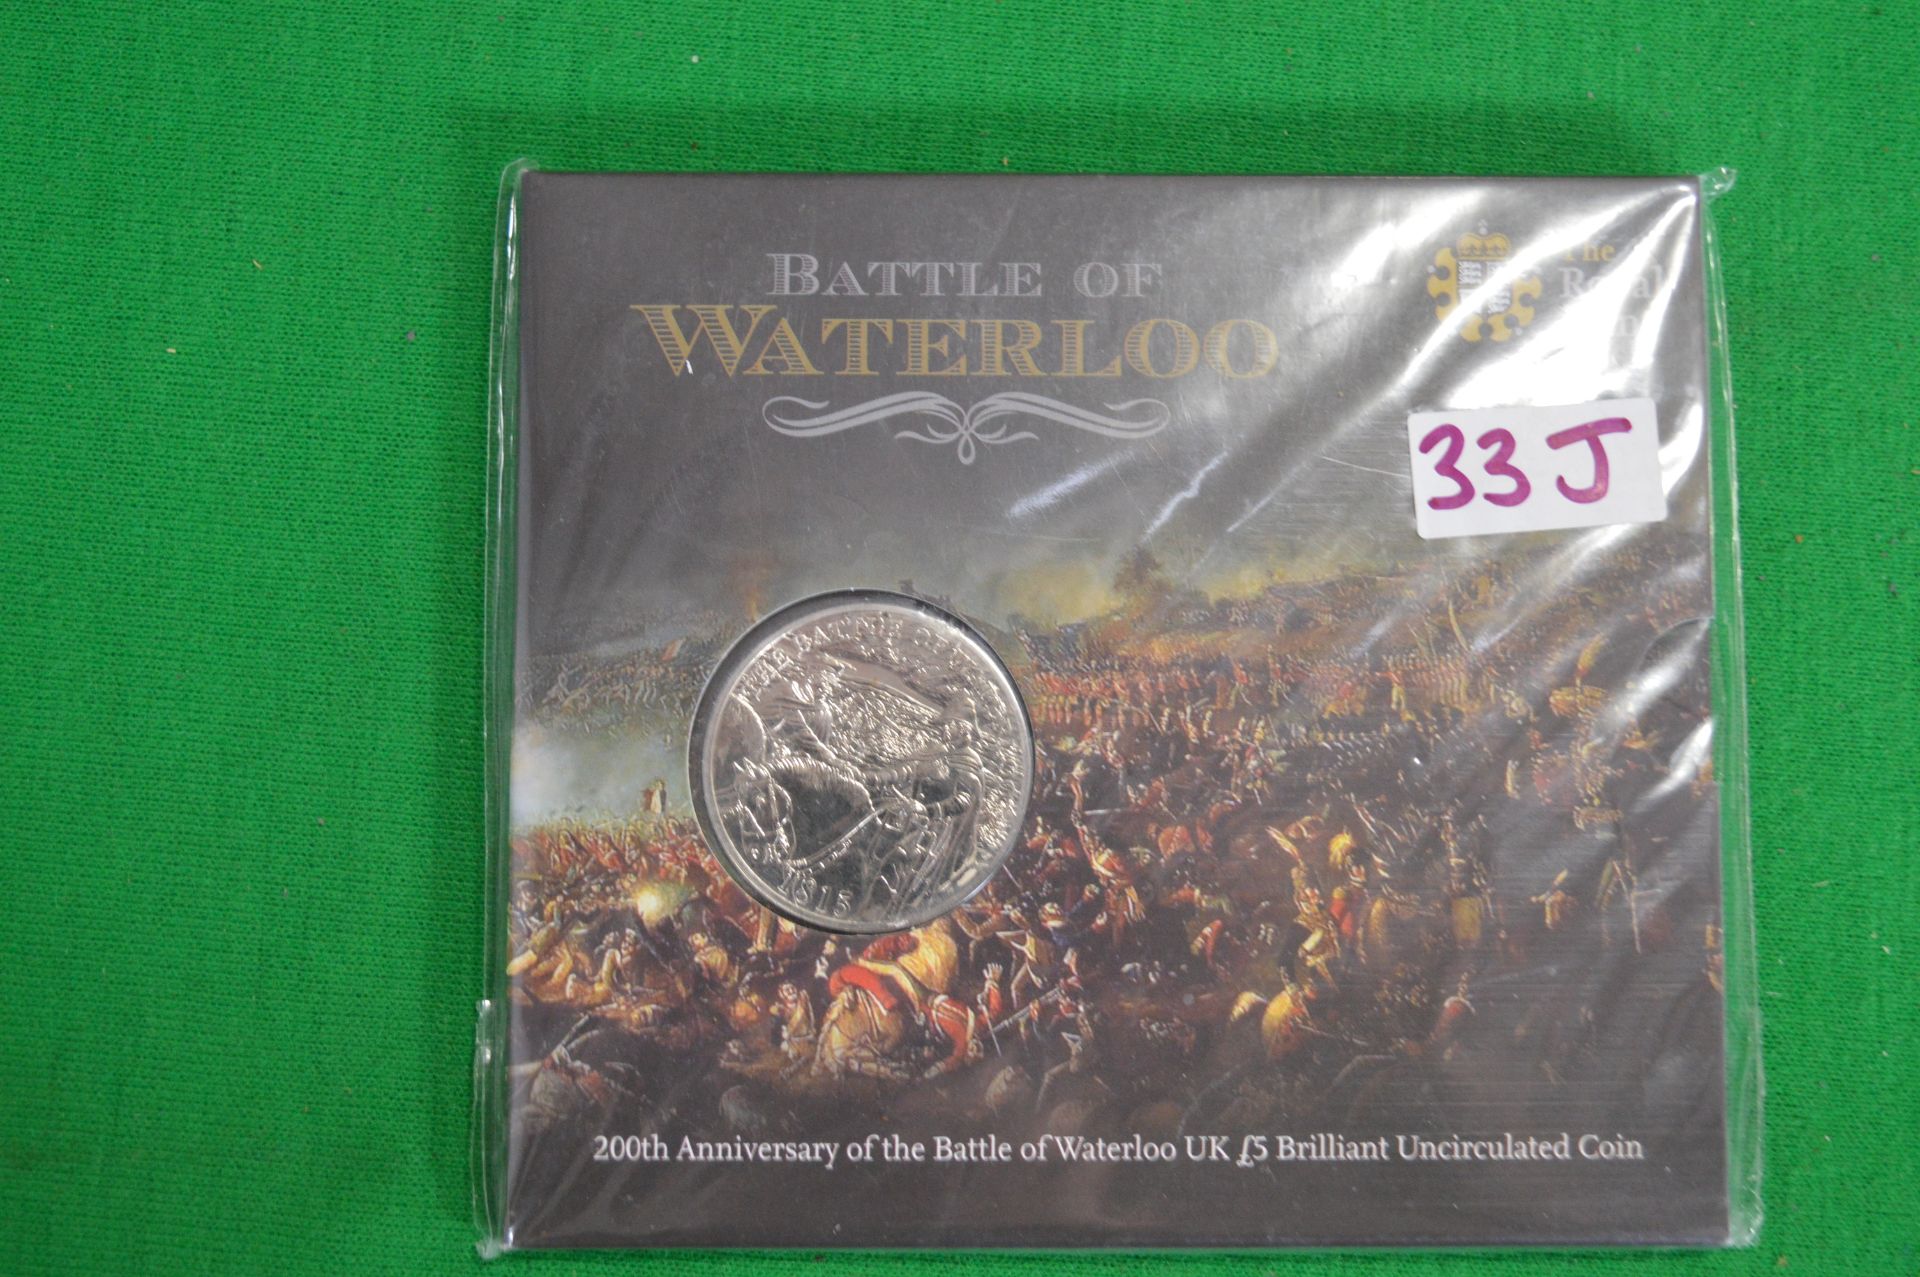 Royal Mint 2014 UK £5 Battle of Waterloo Brilliant Uncirculated Coin